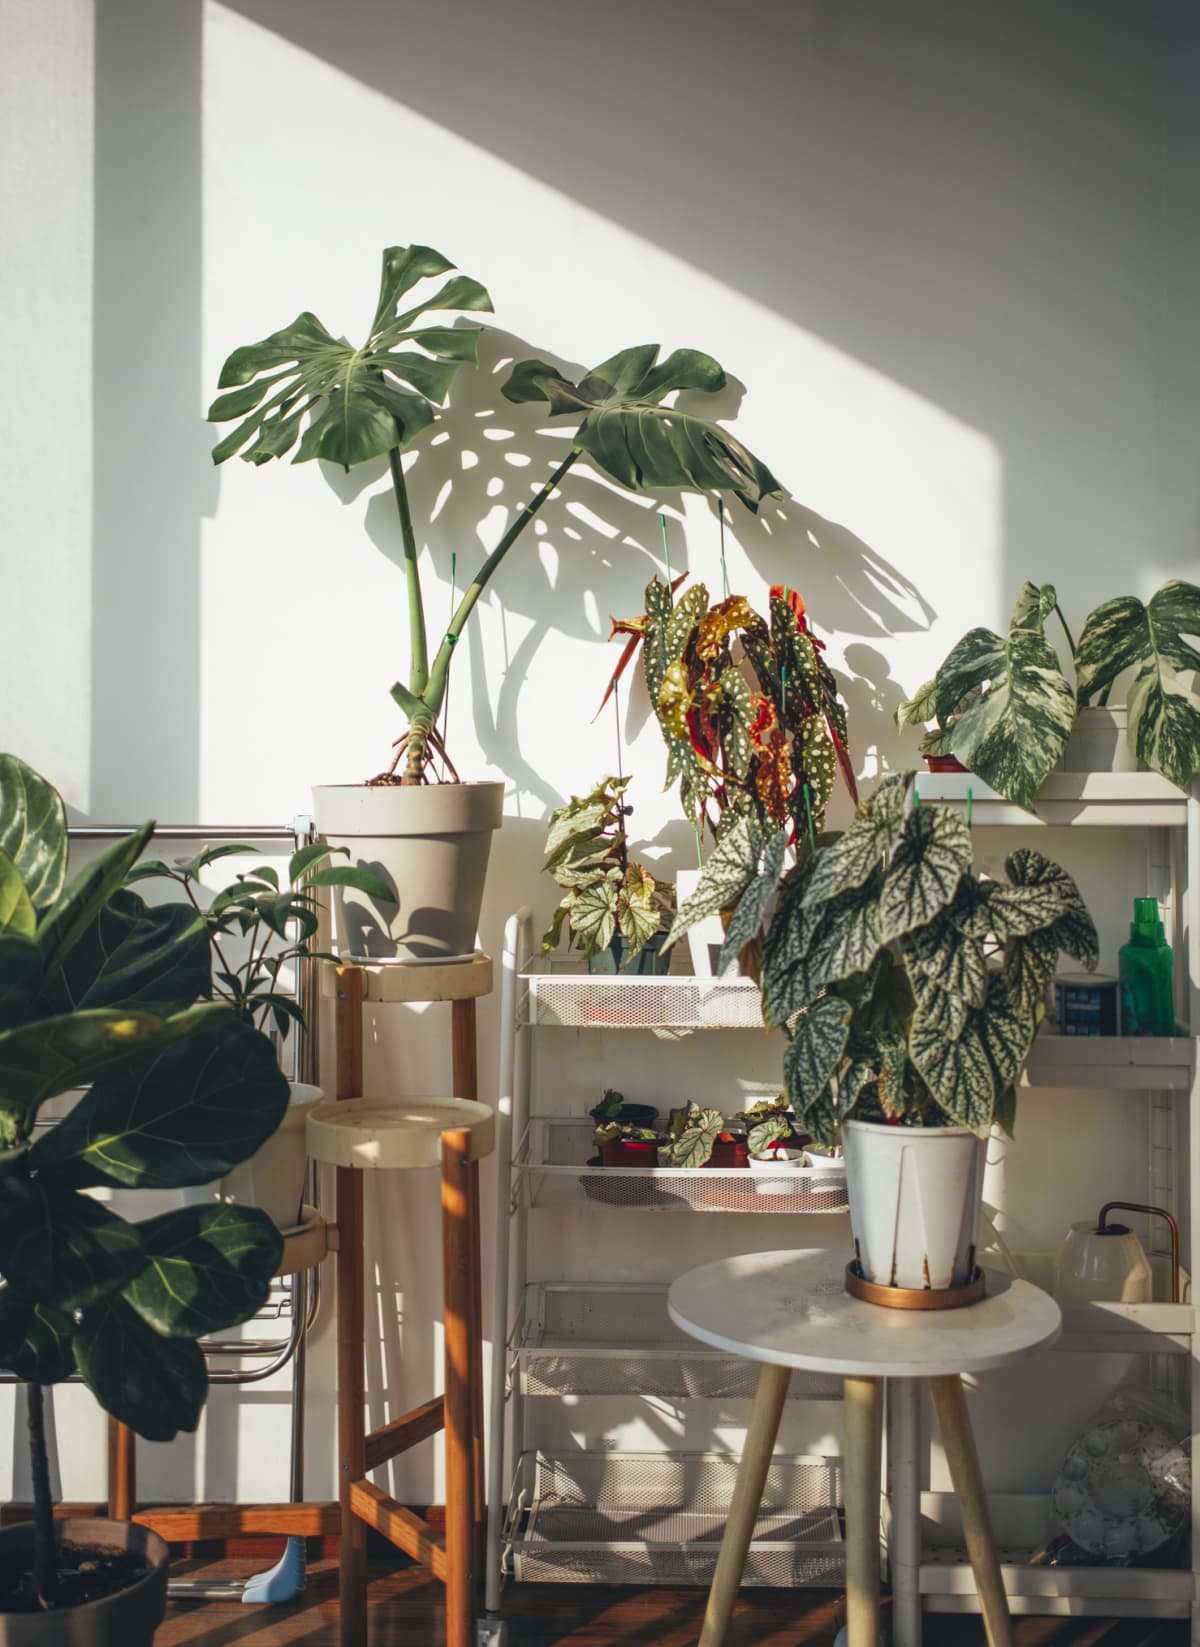 A variety of houseplants.